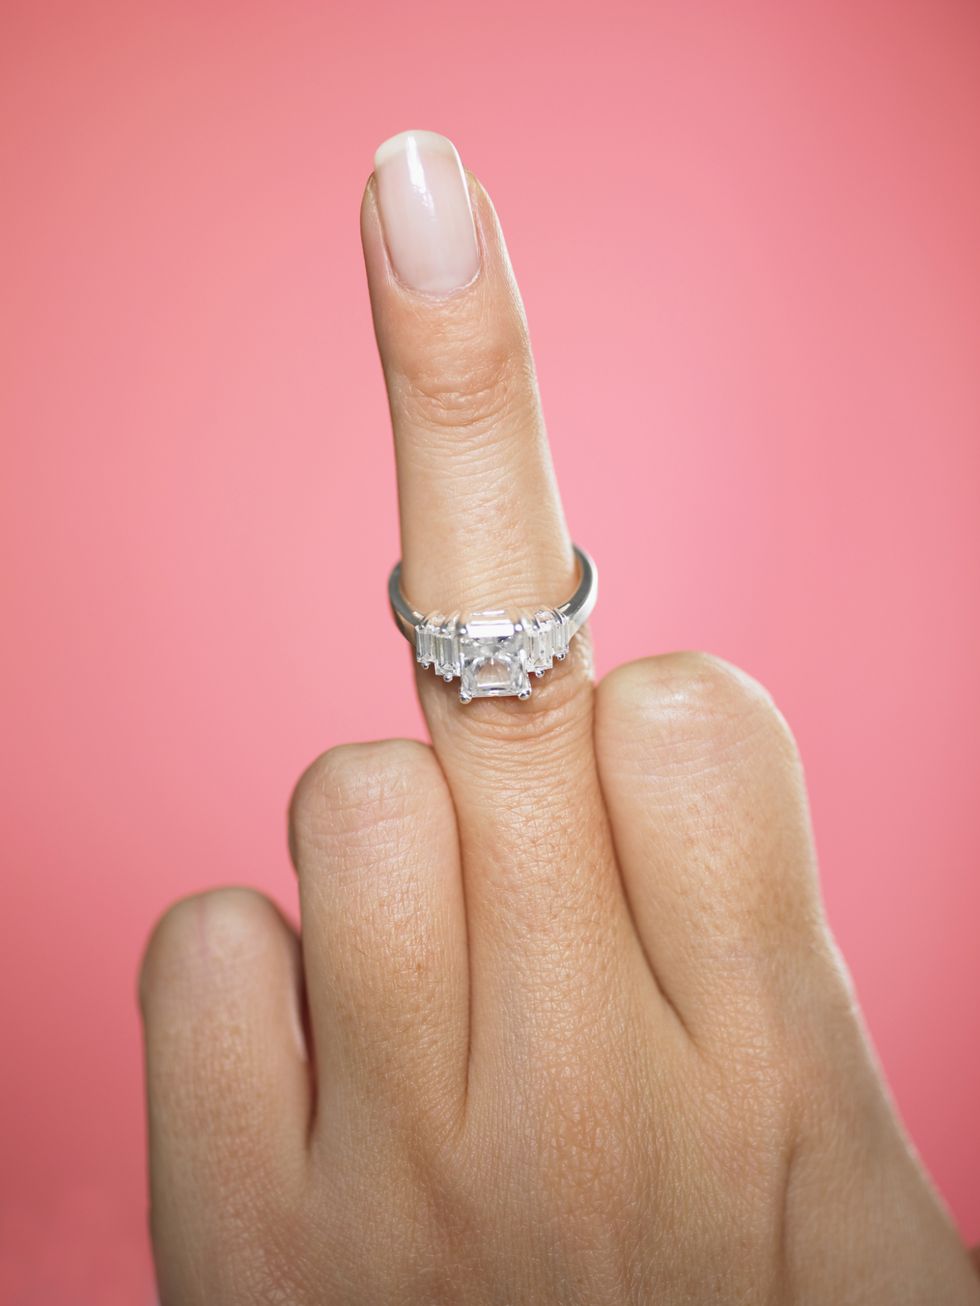 Finger, Skin, Jewellery, Hand, Ring, Nail, Pre-engagement ring, Thumb, Engagement ring, Metal, 